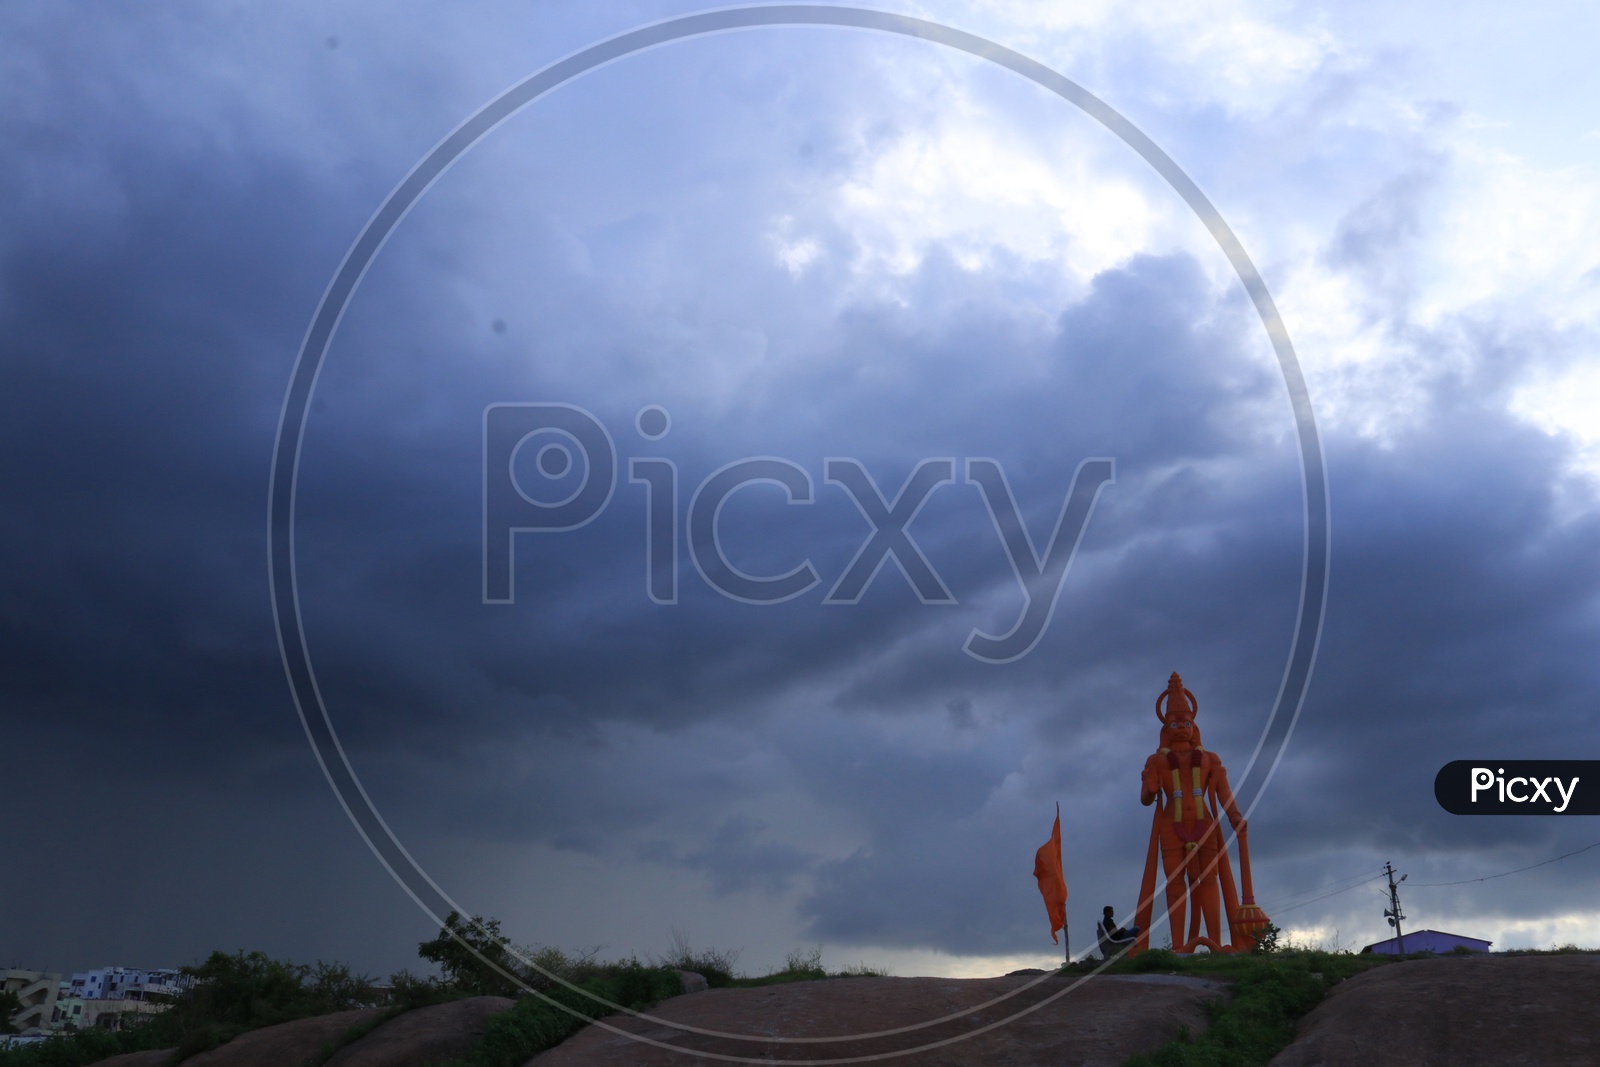 Hanuman statue with clouds in the sky